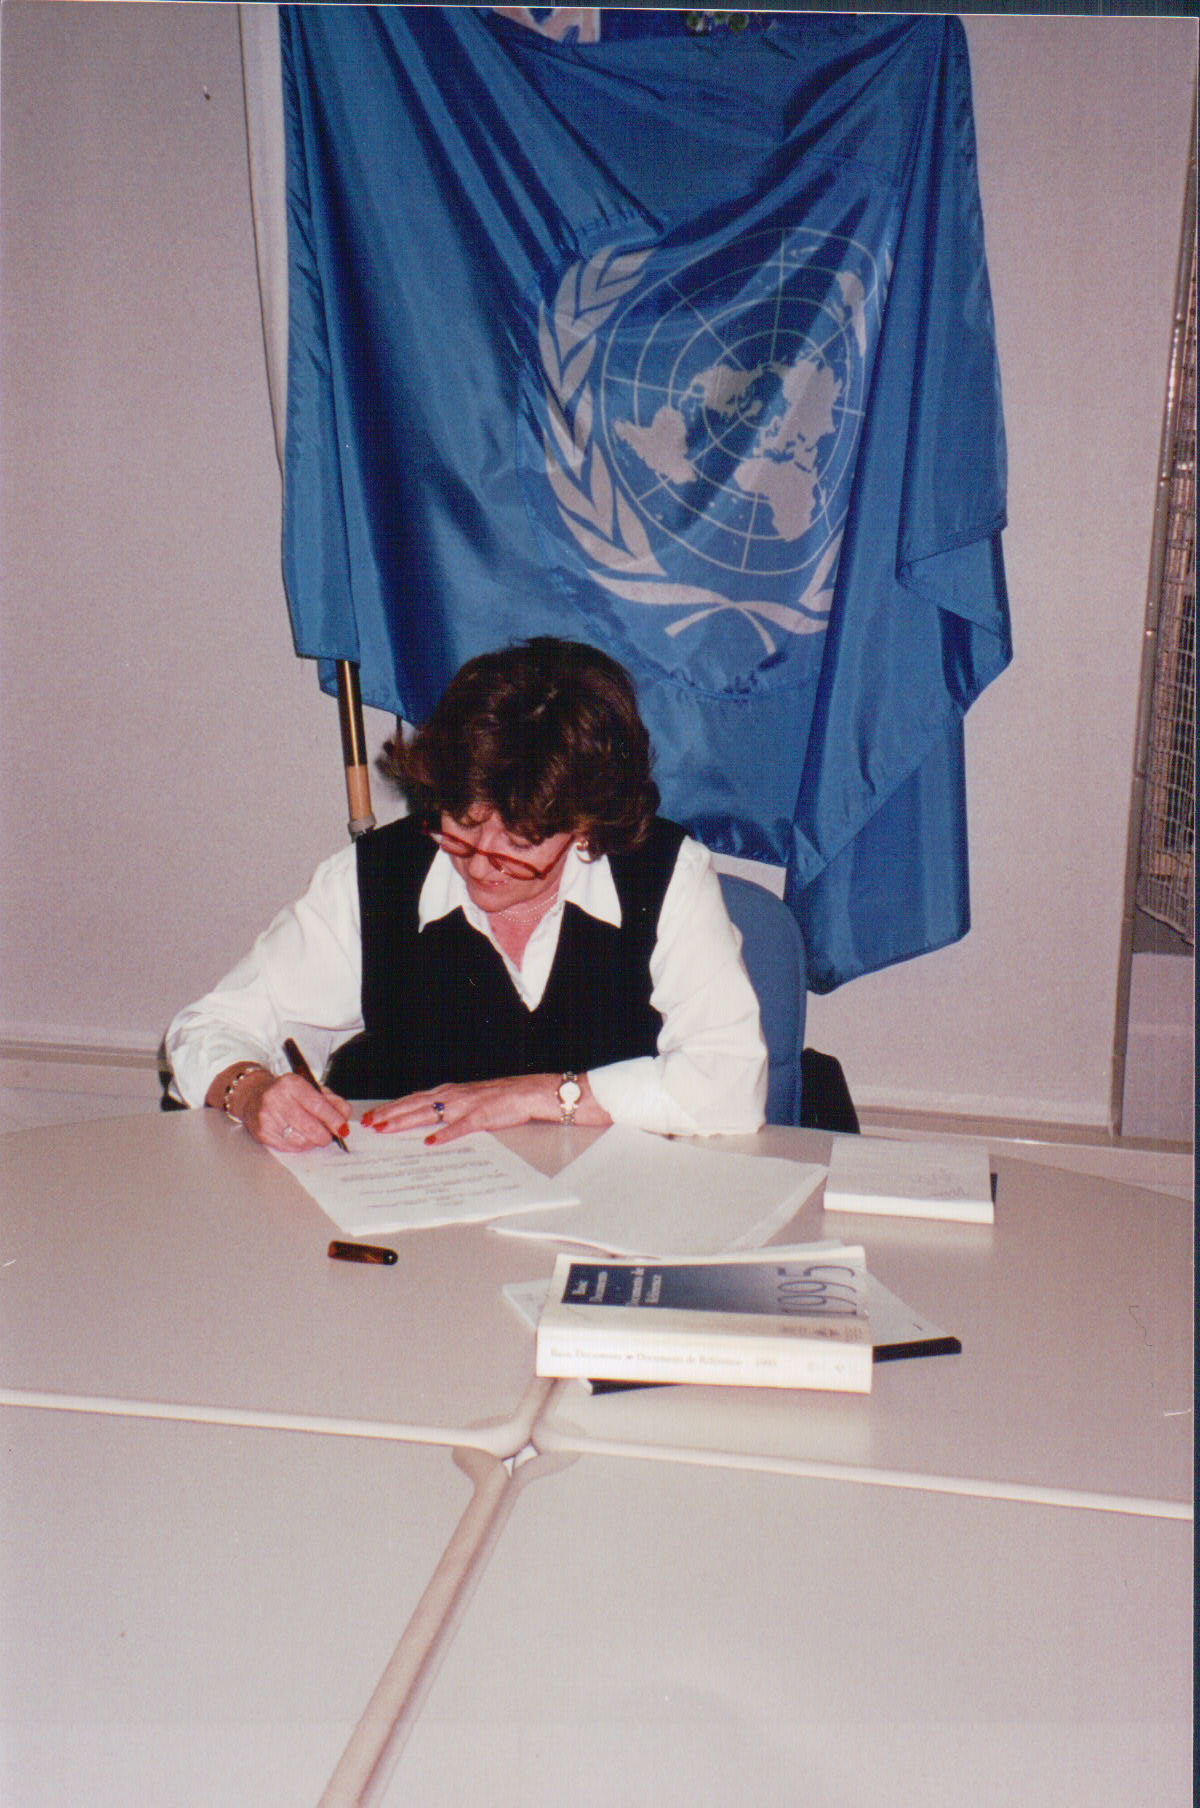 Signing the Indictment versus Slobodan Milo�evi?, The Hague, 22 May 1999, photo provided by Mr Graham Blewitt